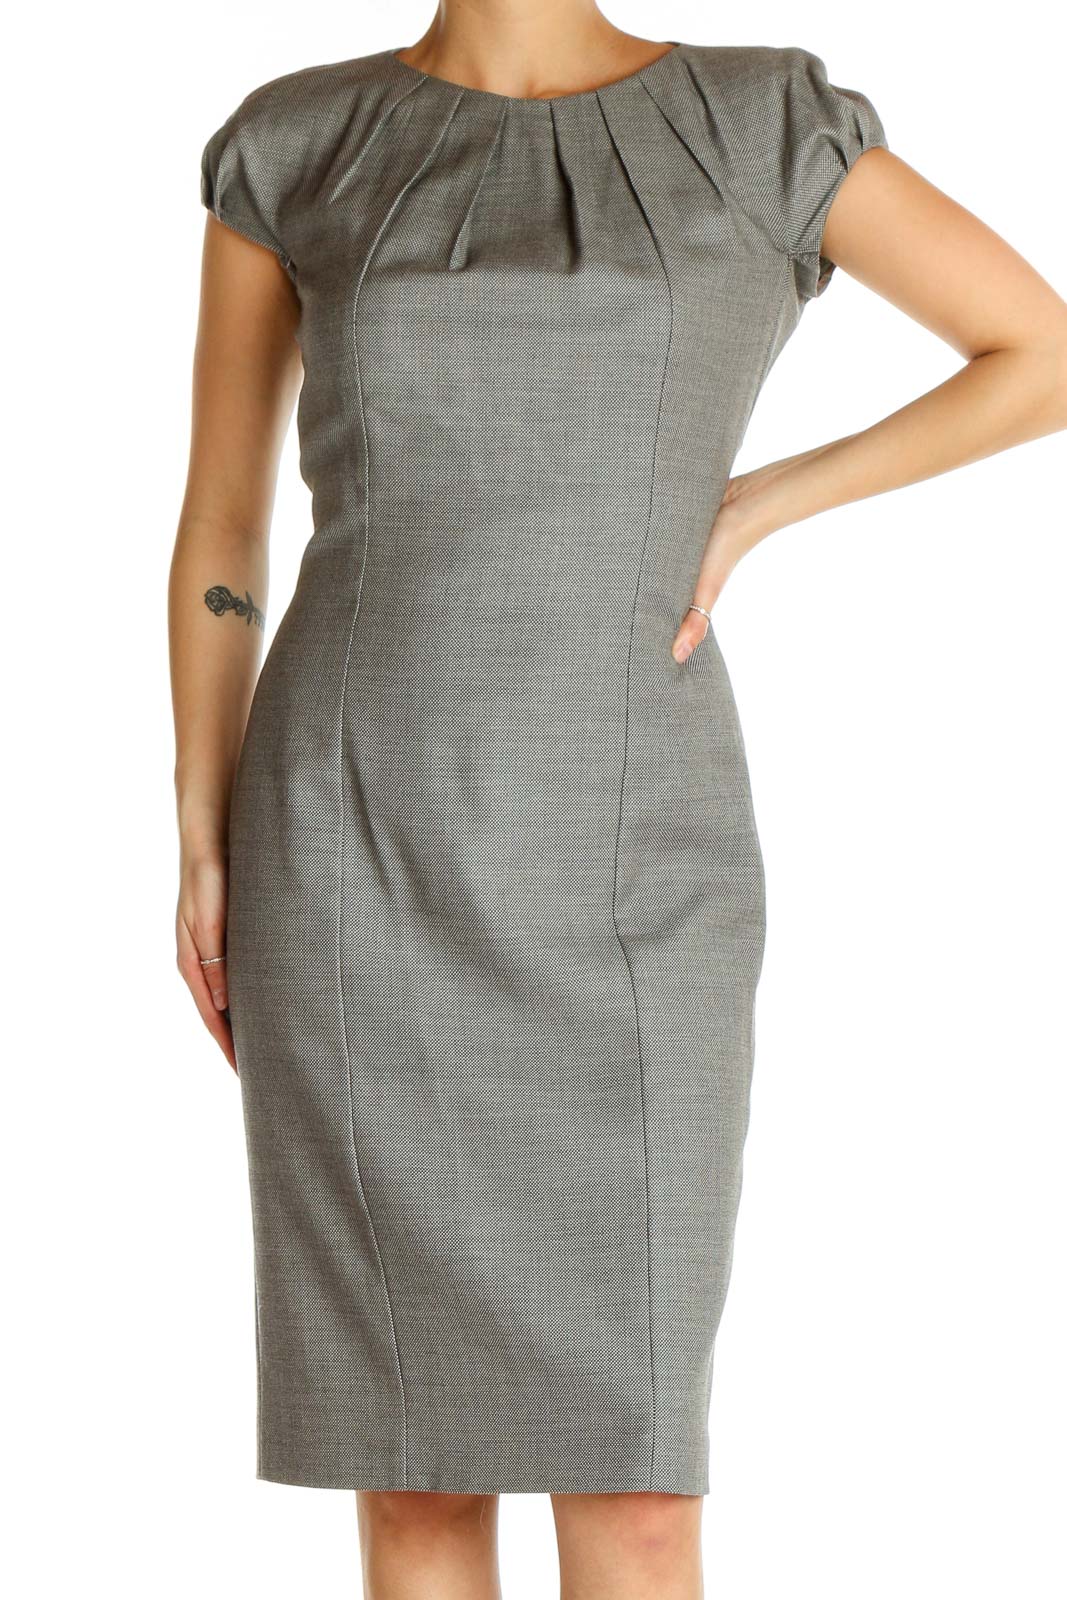 Gray Solid Classic Sheath Dress Front